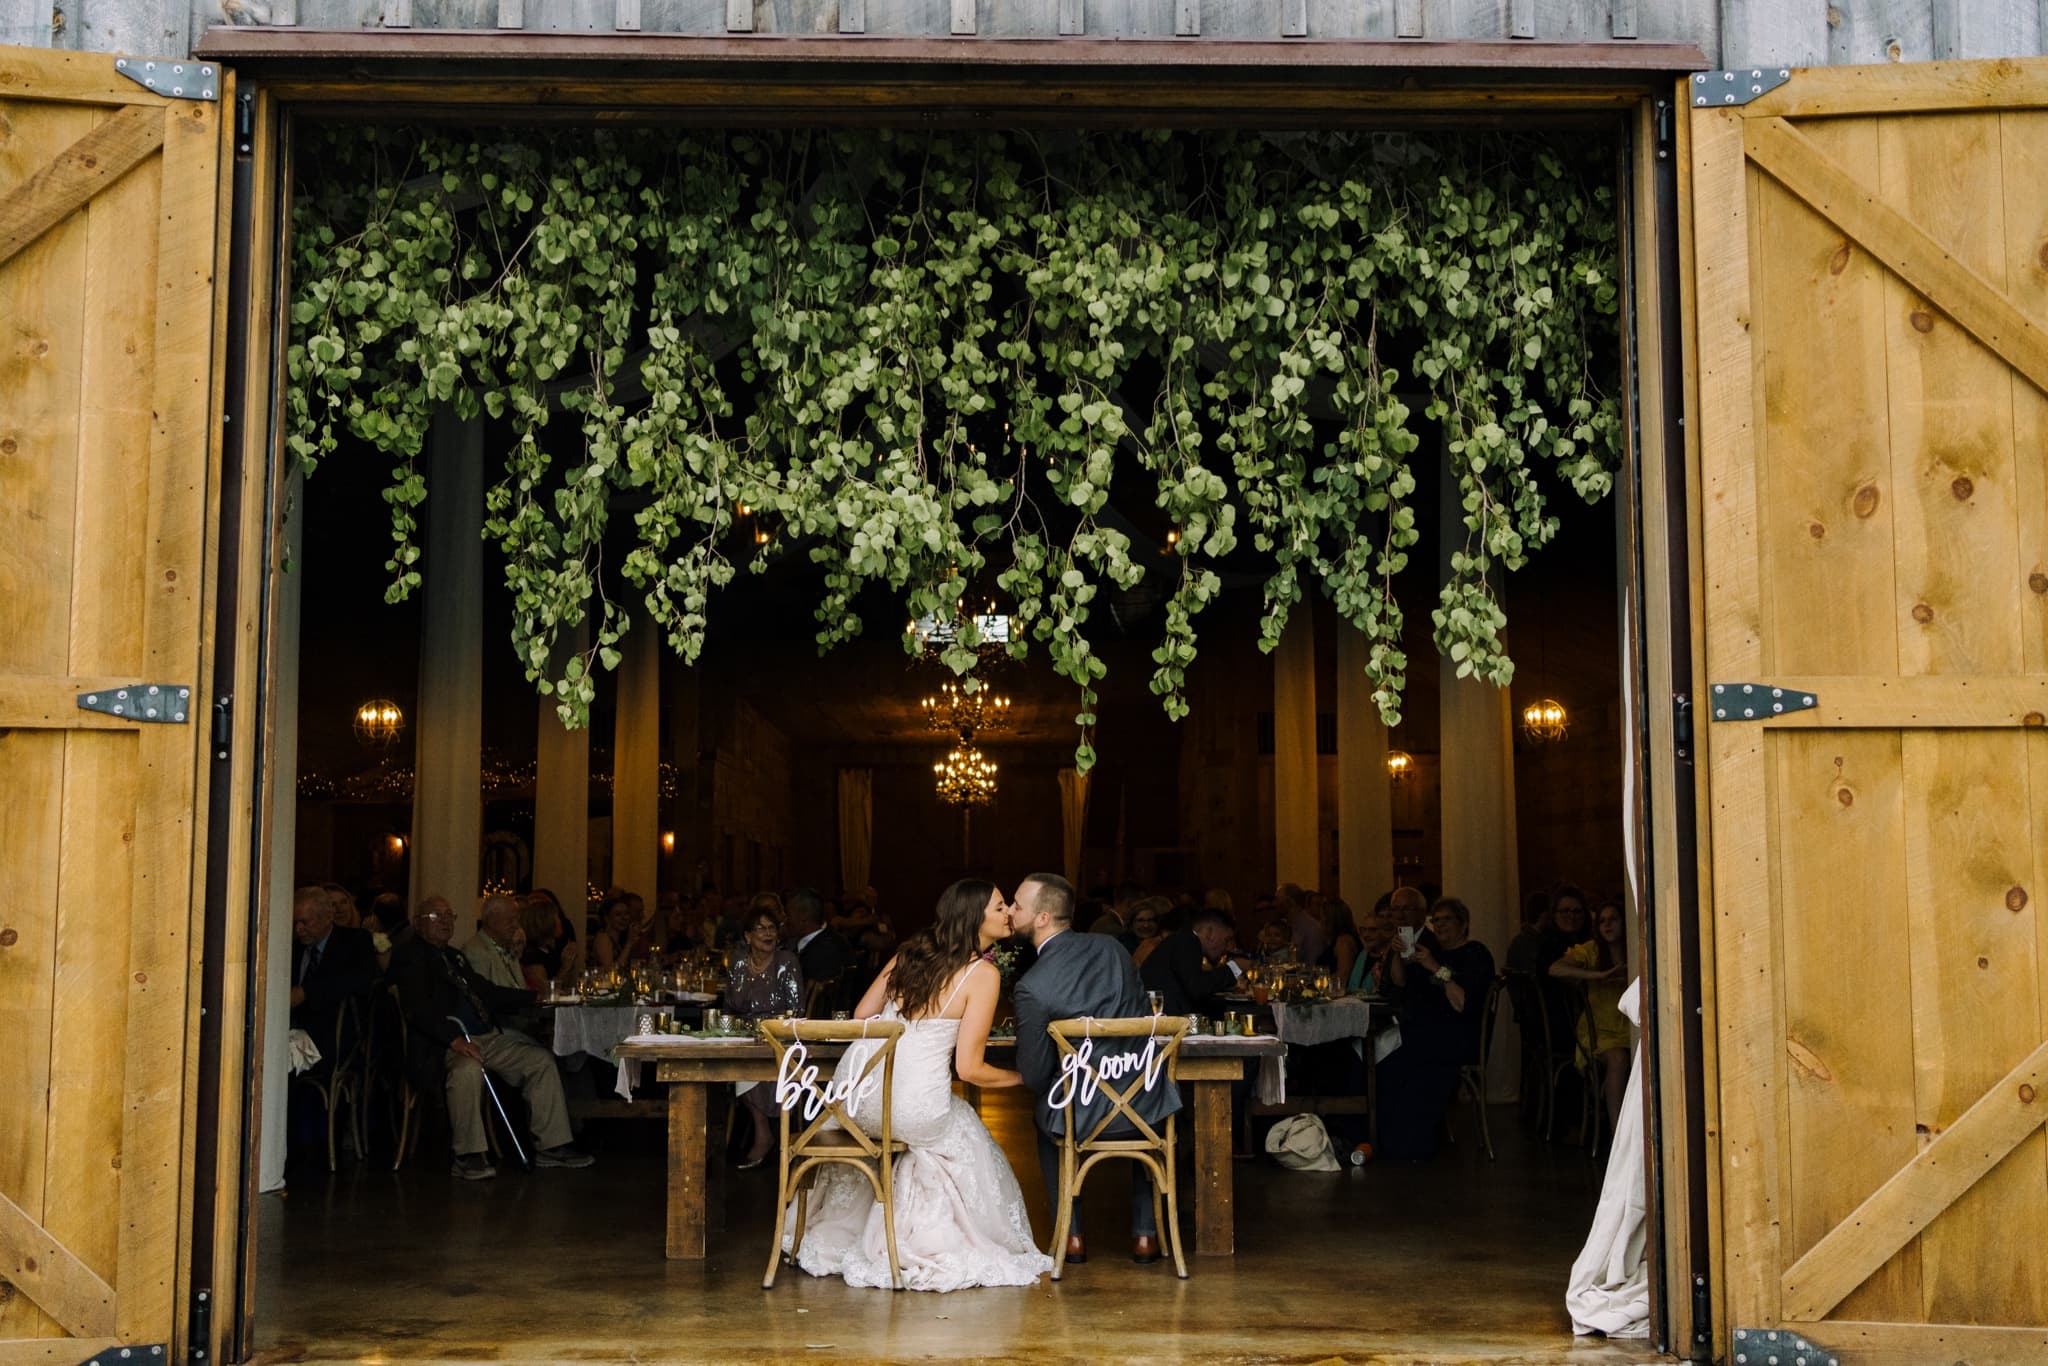 outside looking in at rustic wedding reception bride and groom kiss